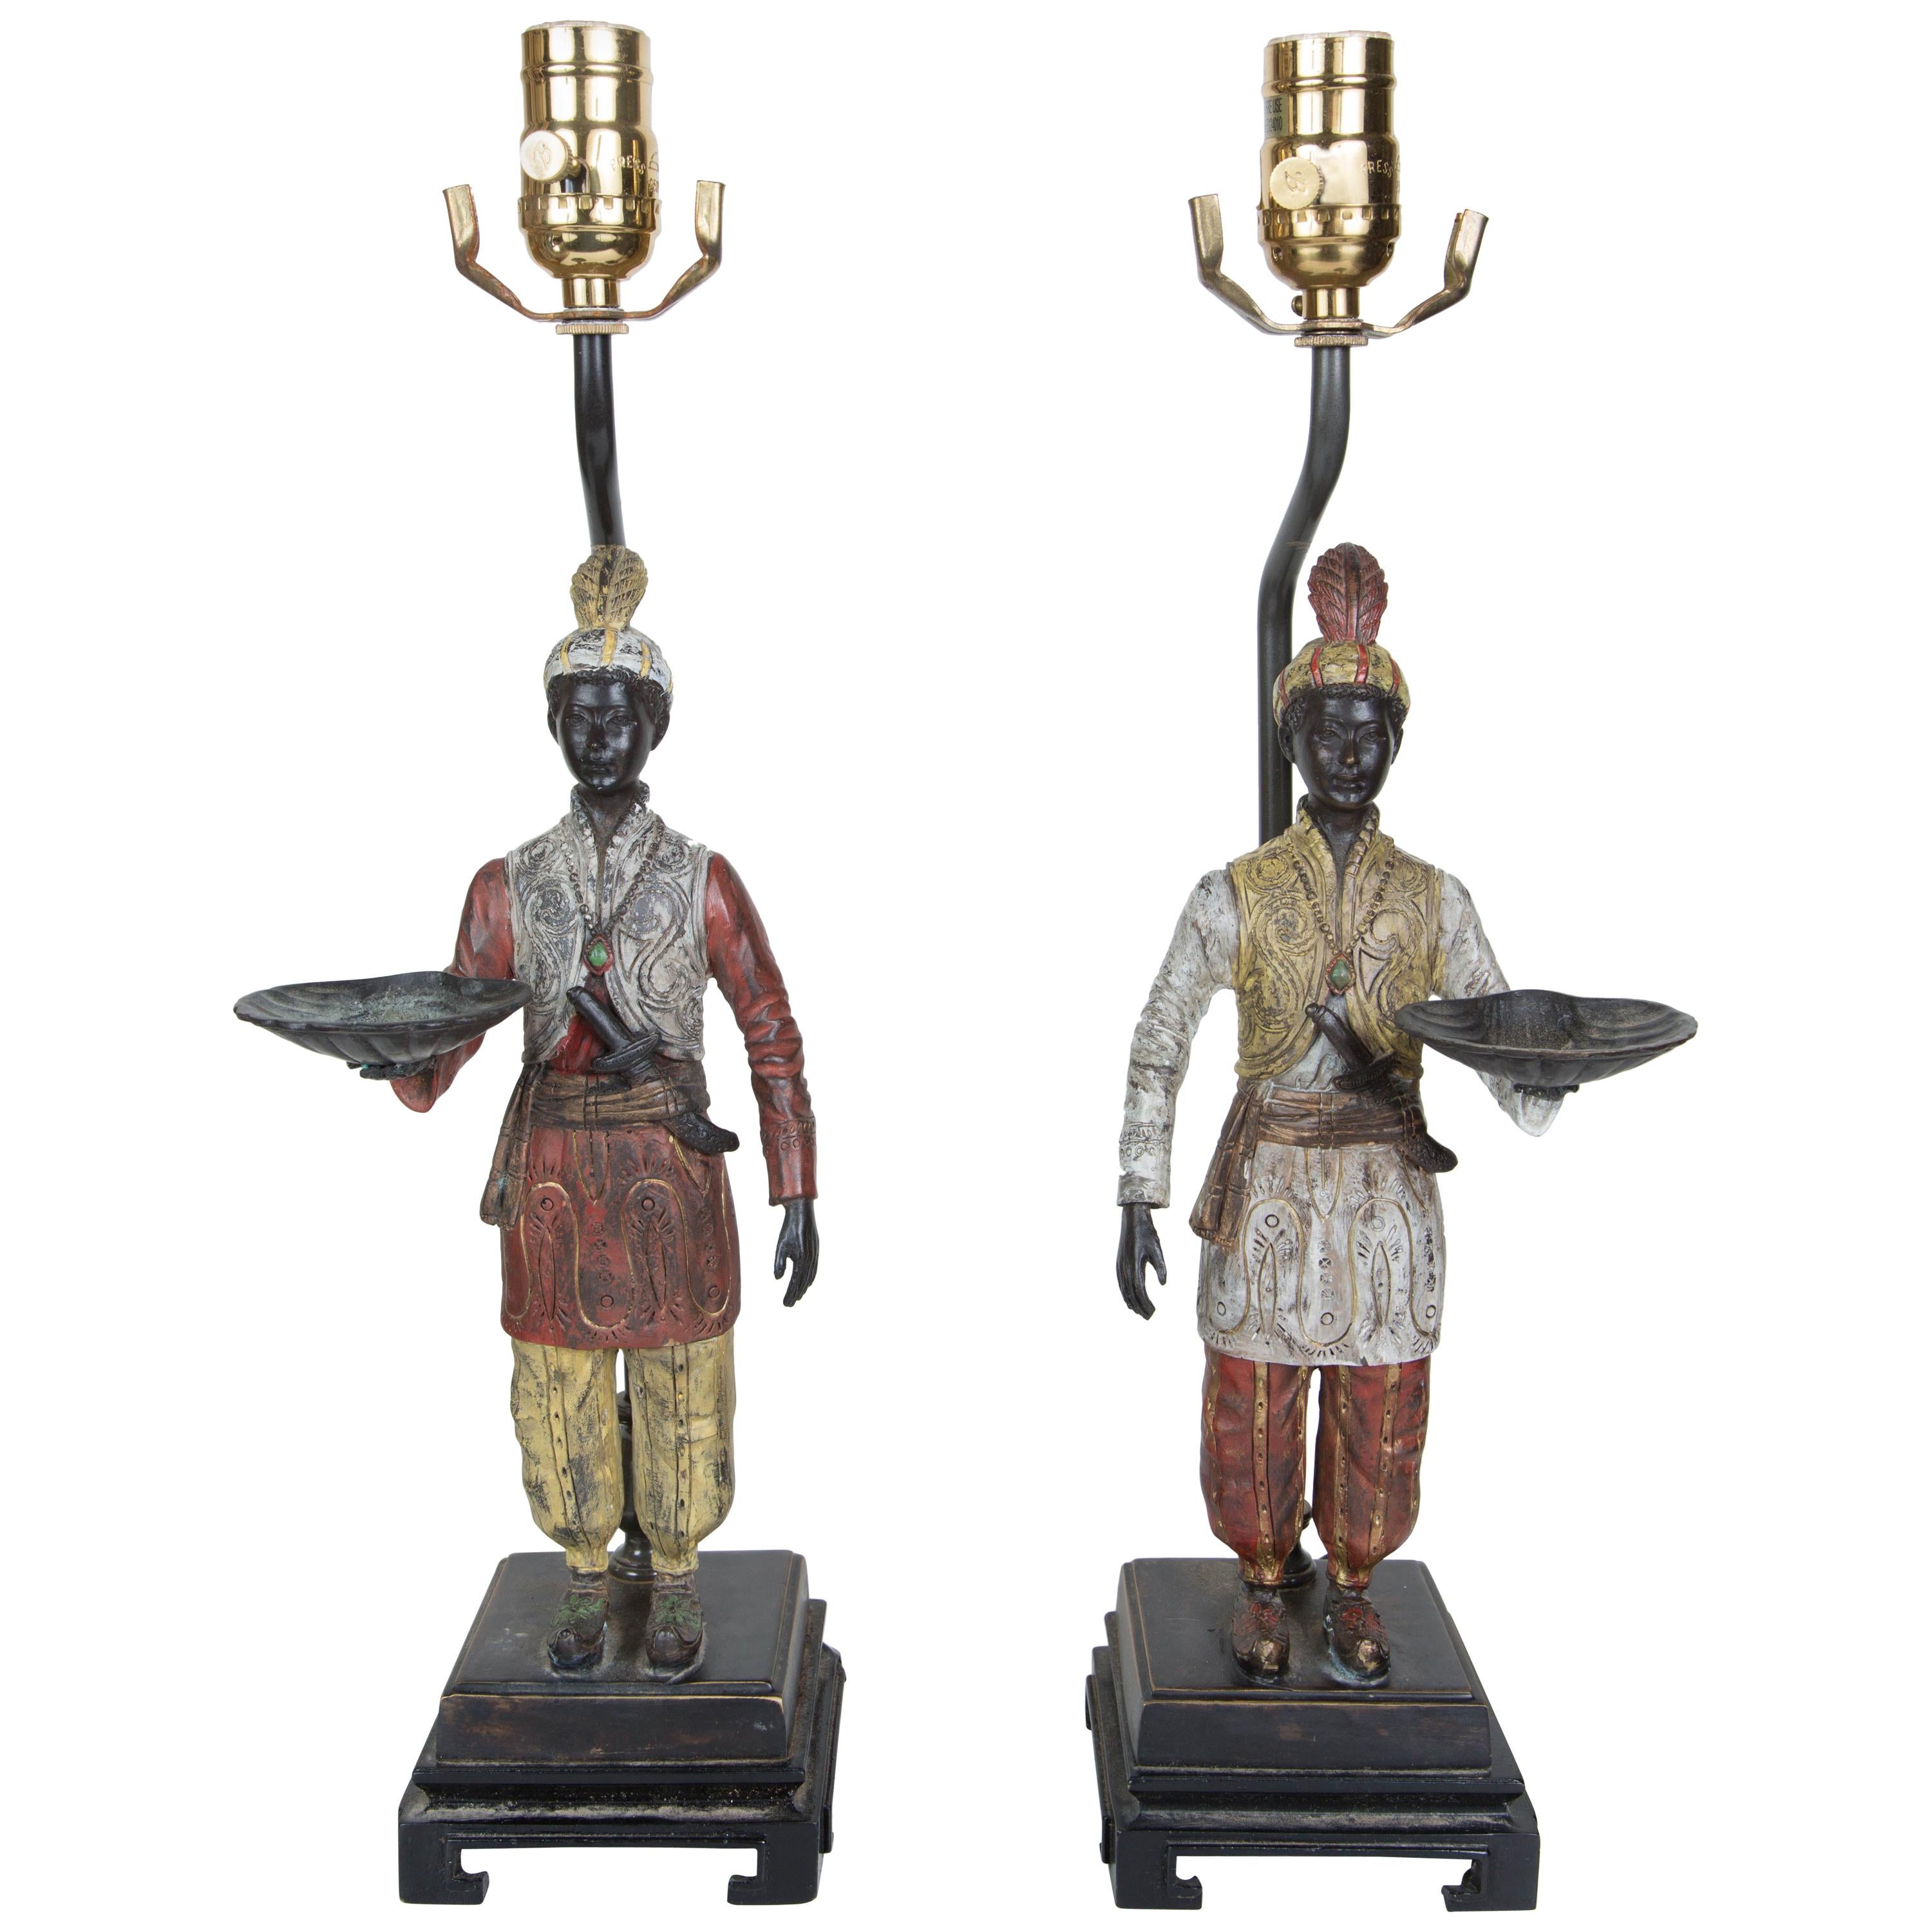 Pair of Unique Table Lamps with Arabian Figurines Holding Abalone Serving Trays